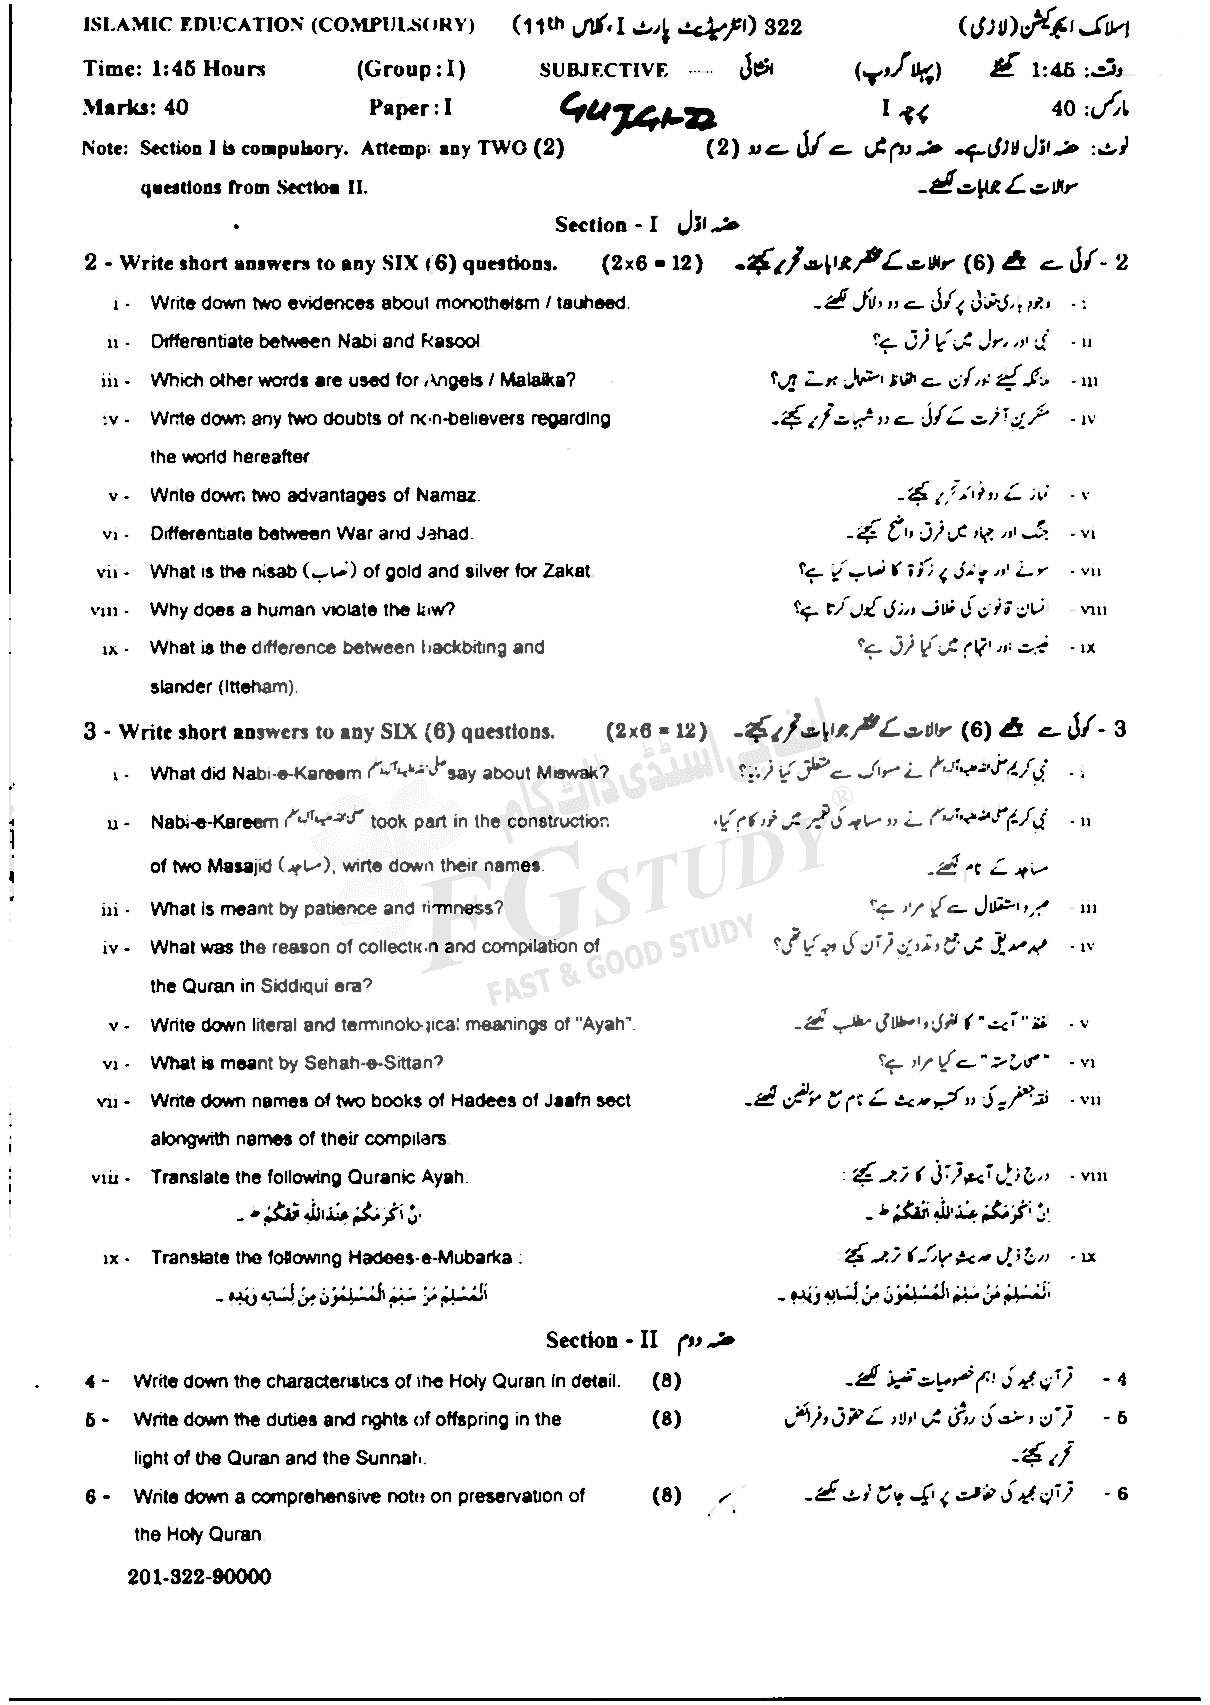 11th Class Islamic Education Past Paper 2022 Gujranwala Board Group 1 Subjective